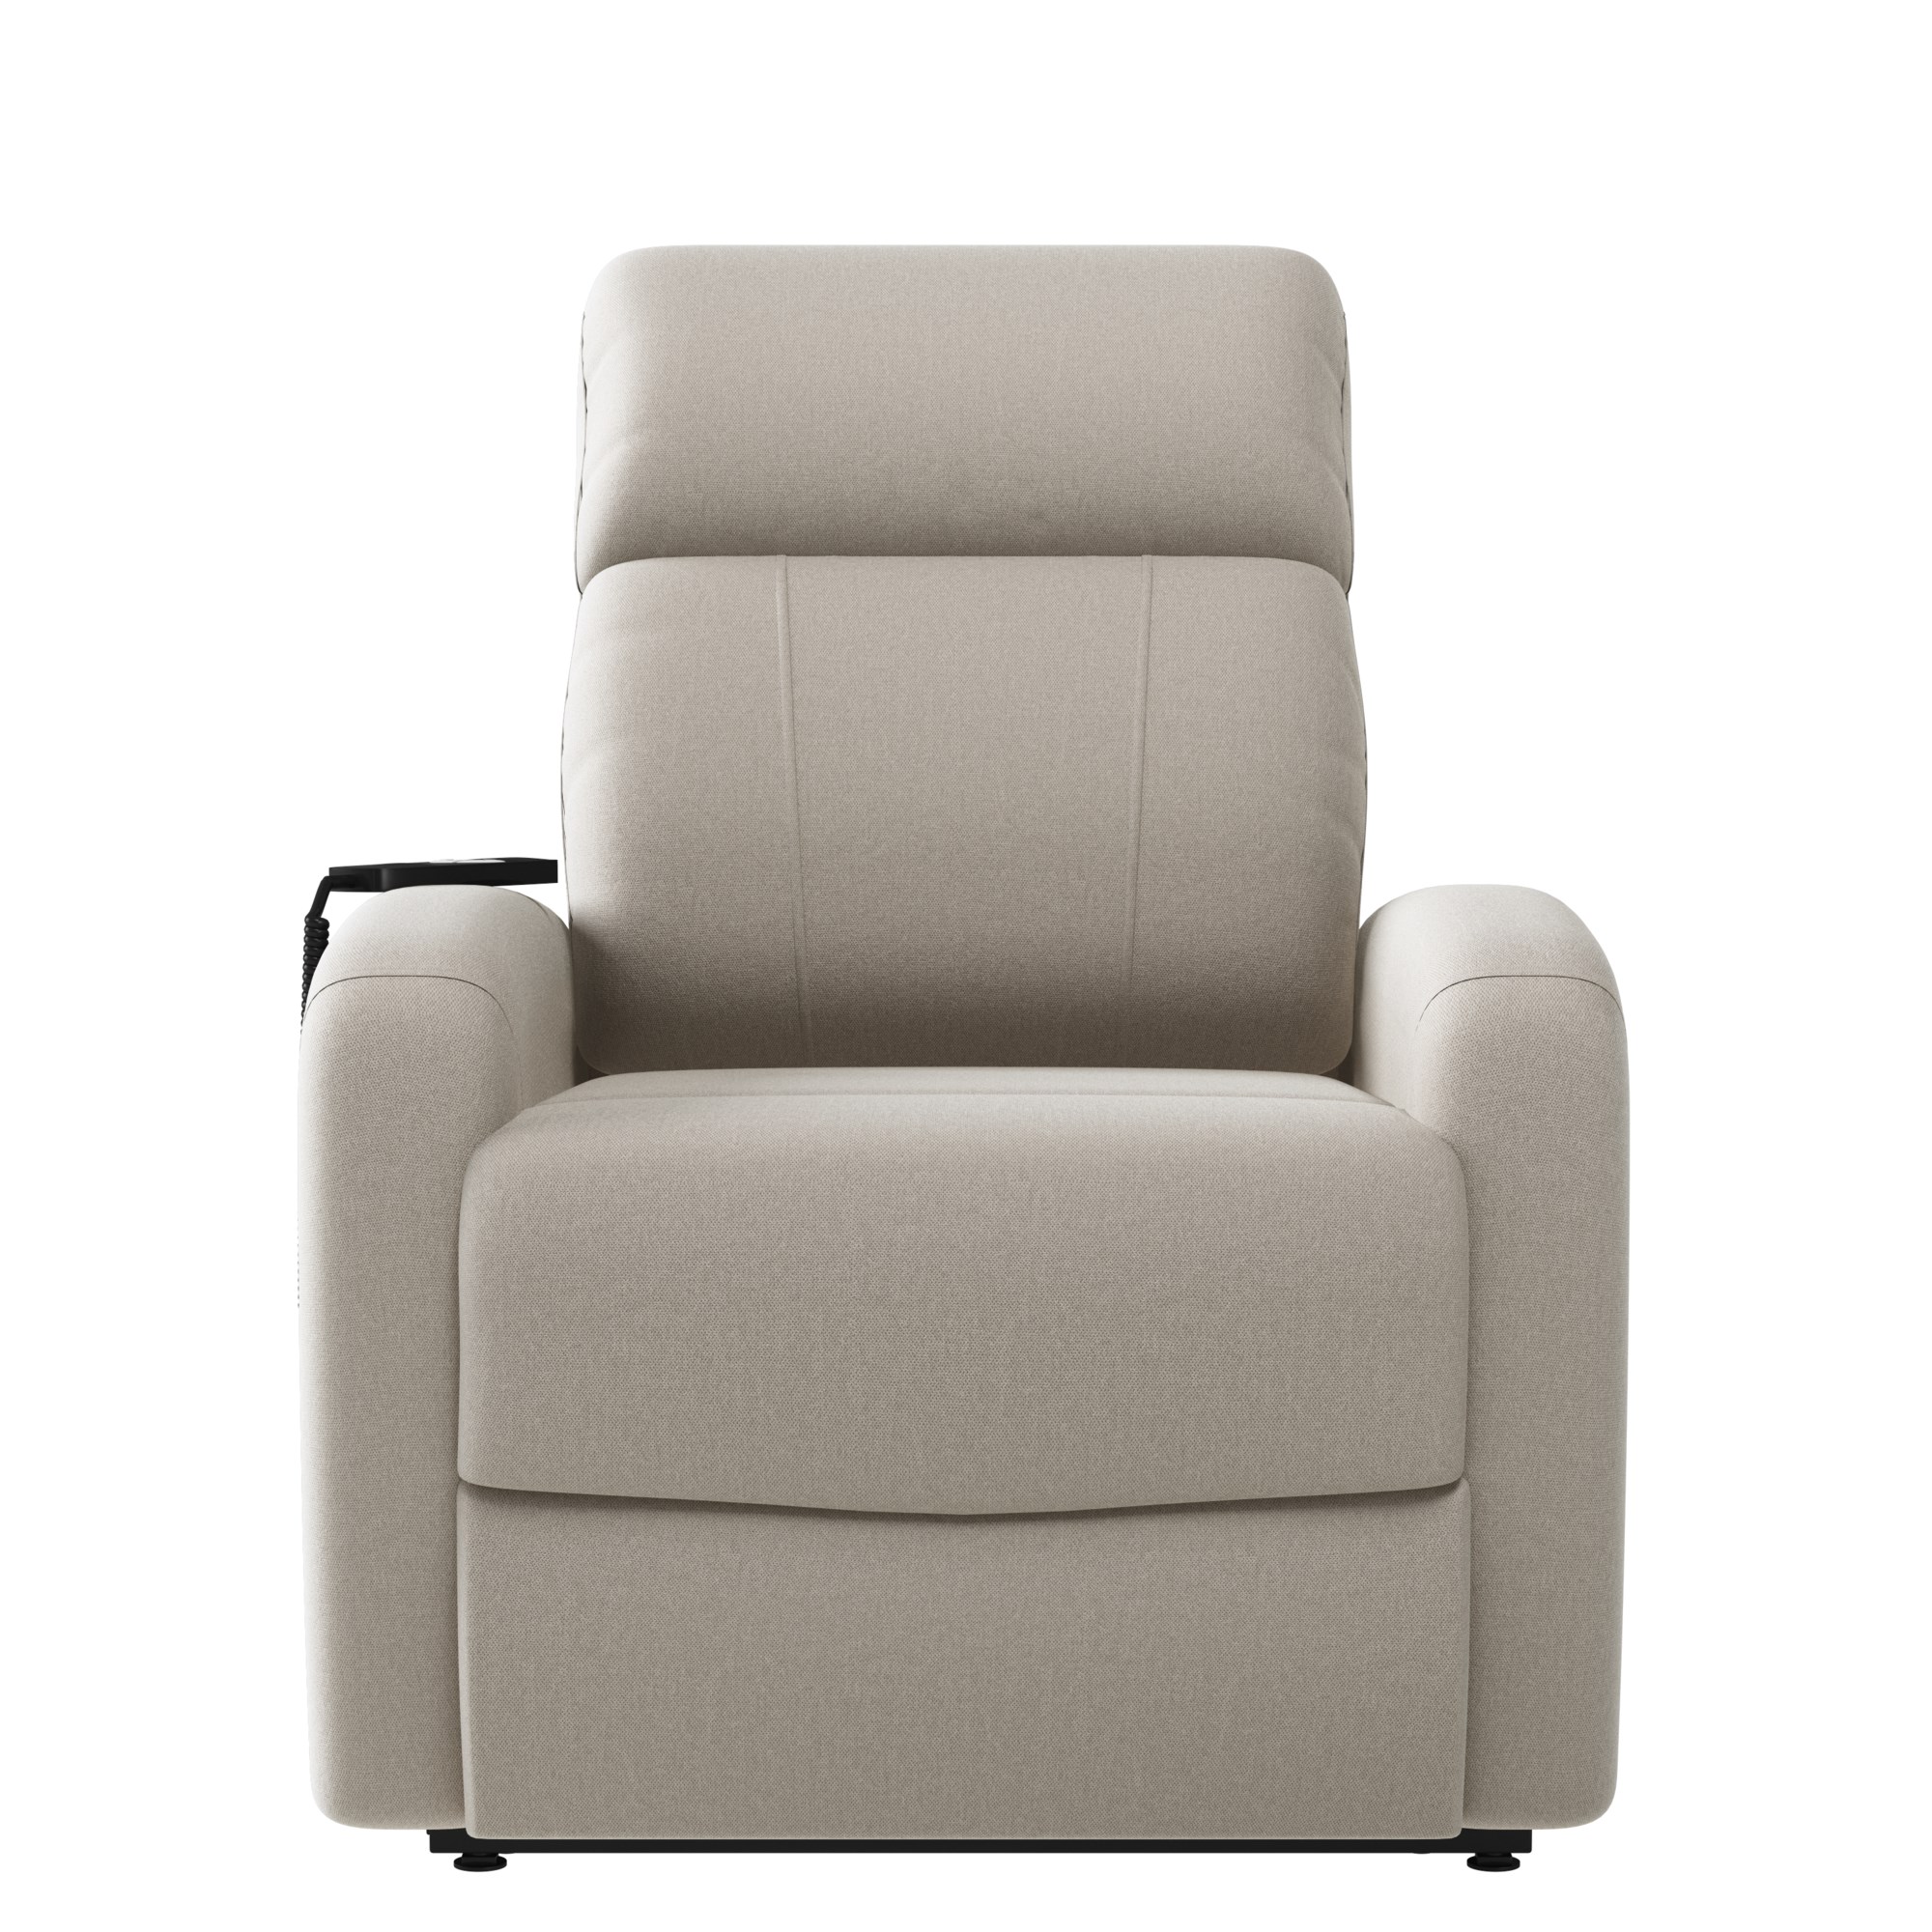 Lift Chairs and Rising Recliners